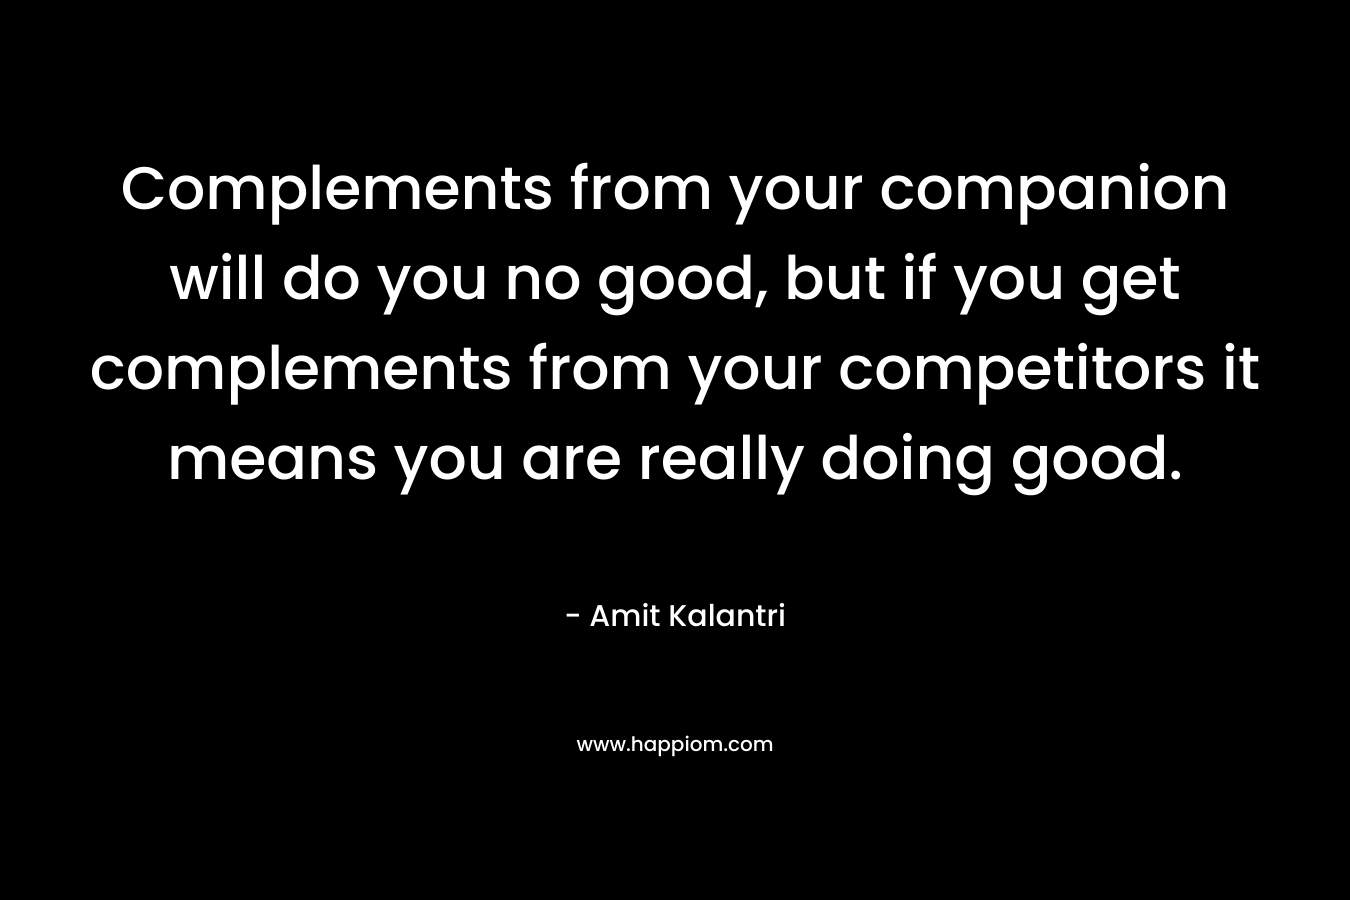 Complements from your companion will do you no good, but if you get complements from your competitors it means you are really doing good. – Amit Kalantri